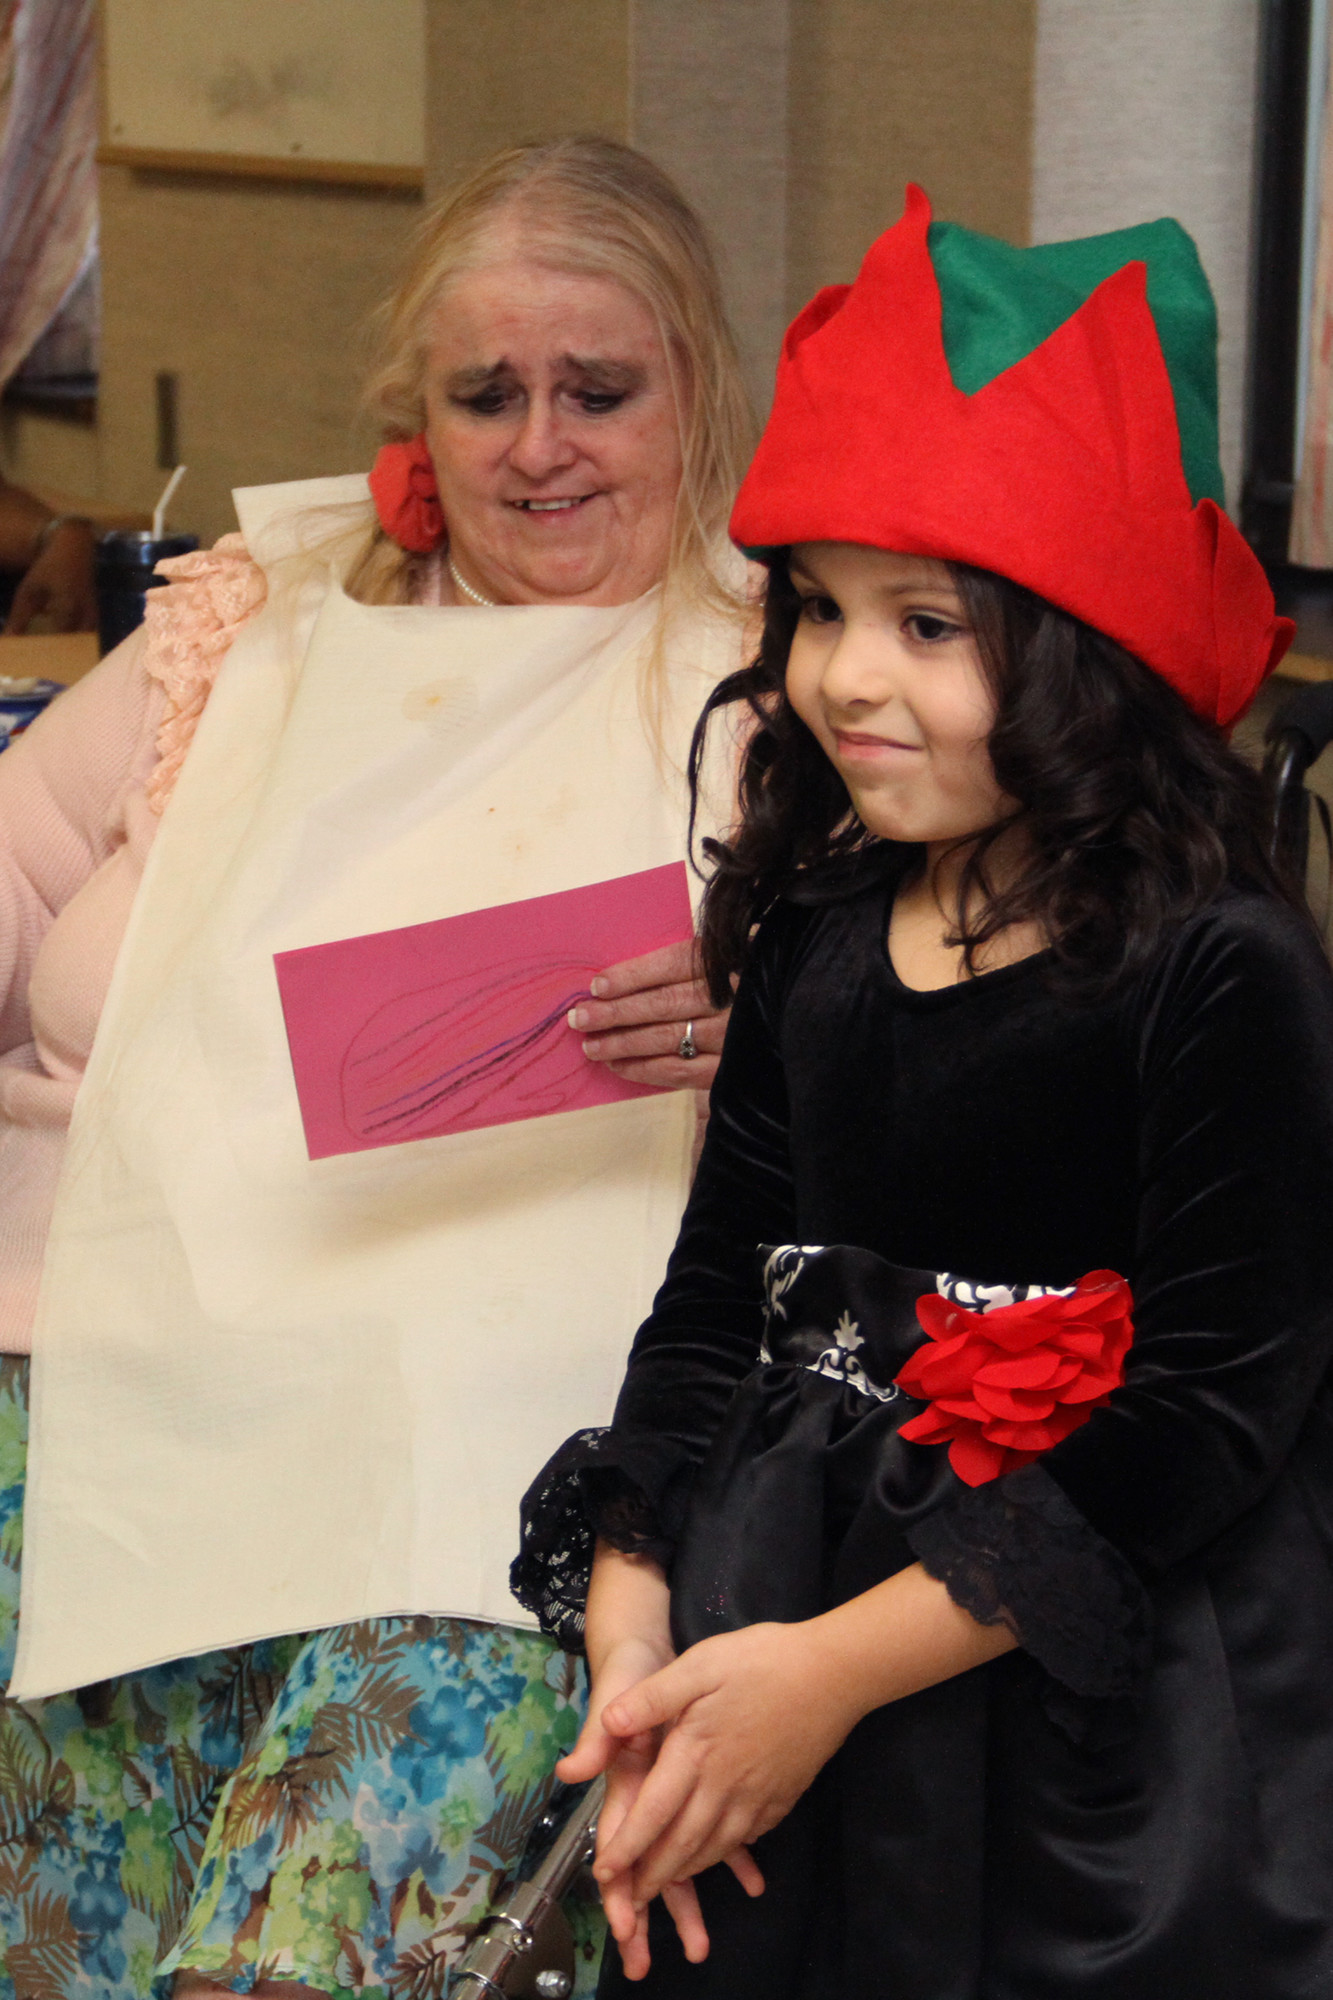 Ava Mosey handed out homemade Christmas cards to residents.